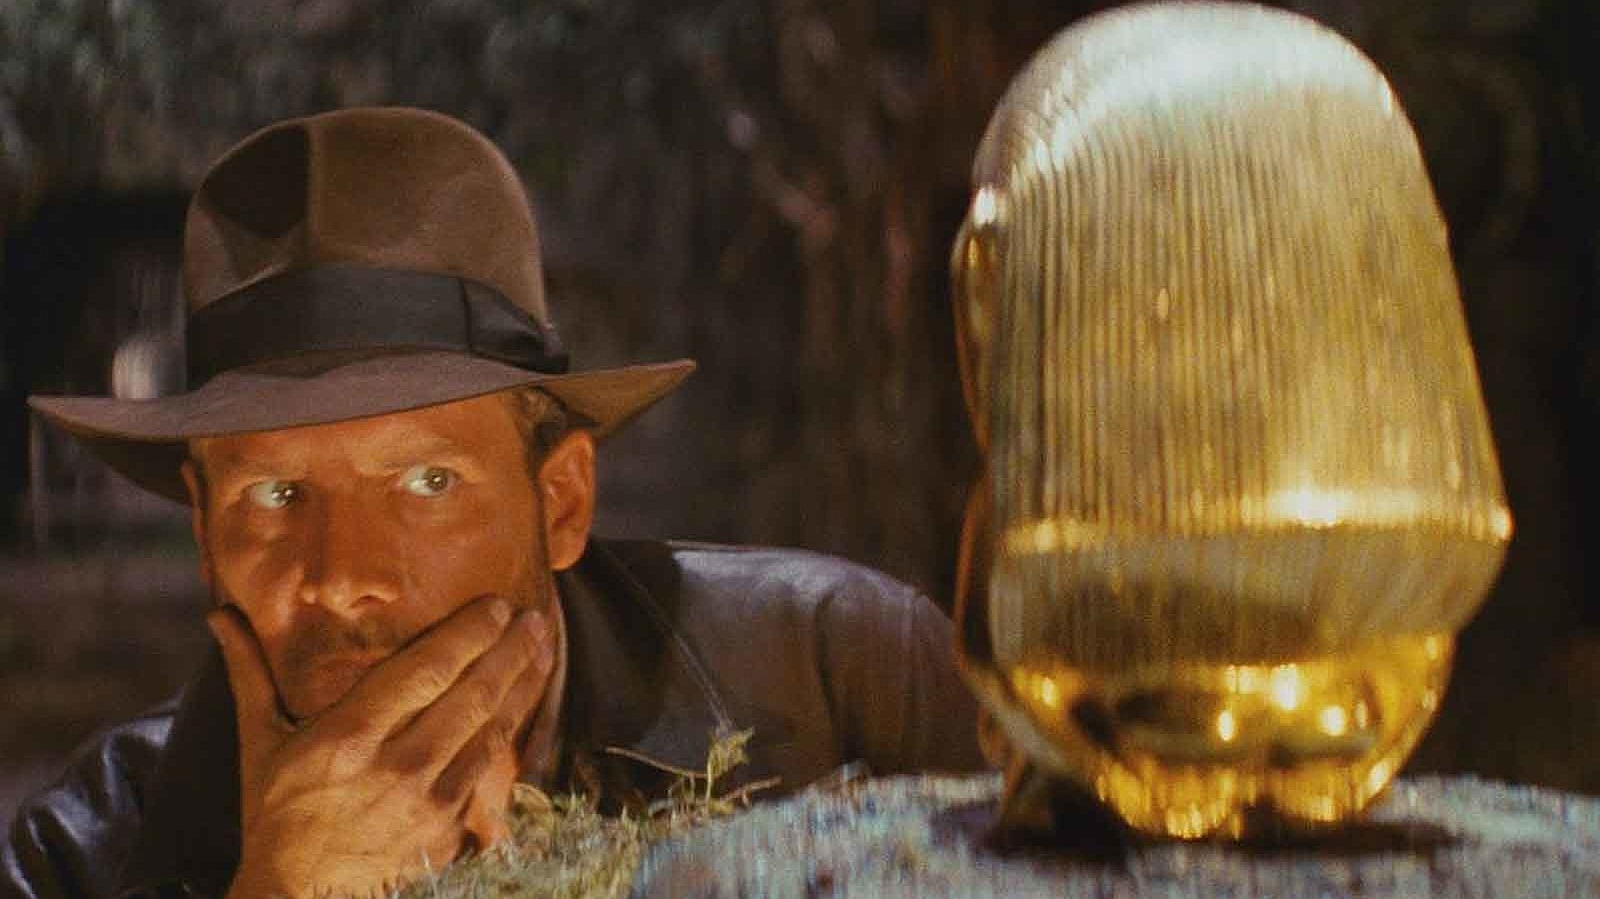 https://www.grunge.com/img/gallery/things-the-indiana-jones-movies-get-right-about-history/l-intro-1600807621.jpg